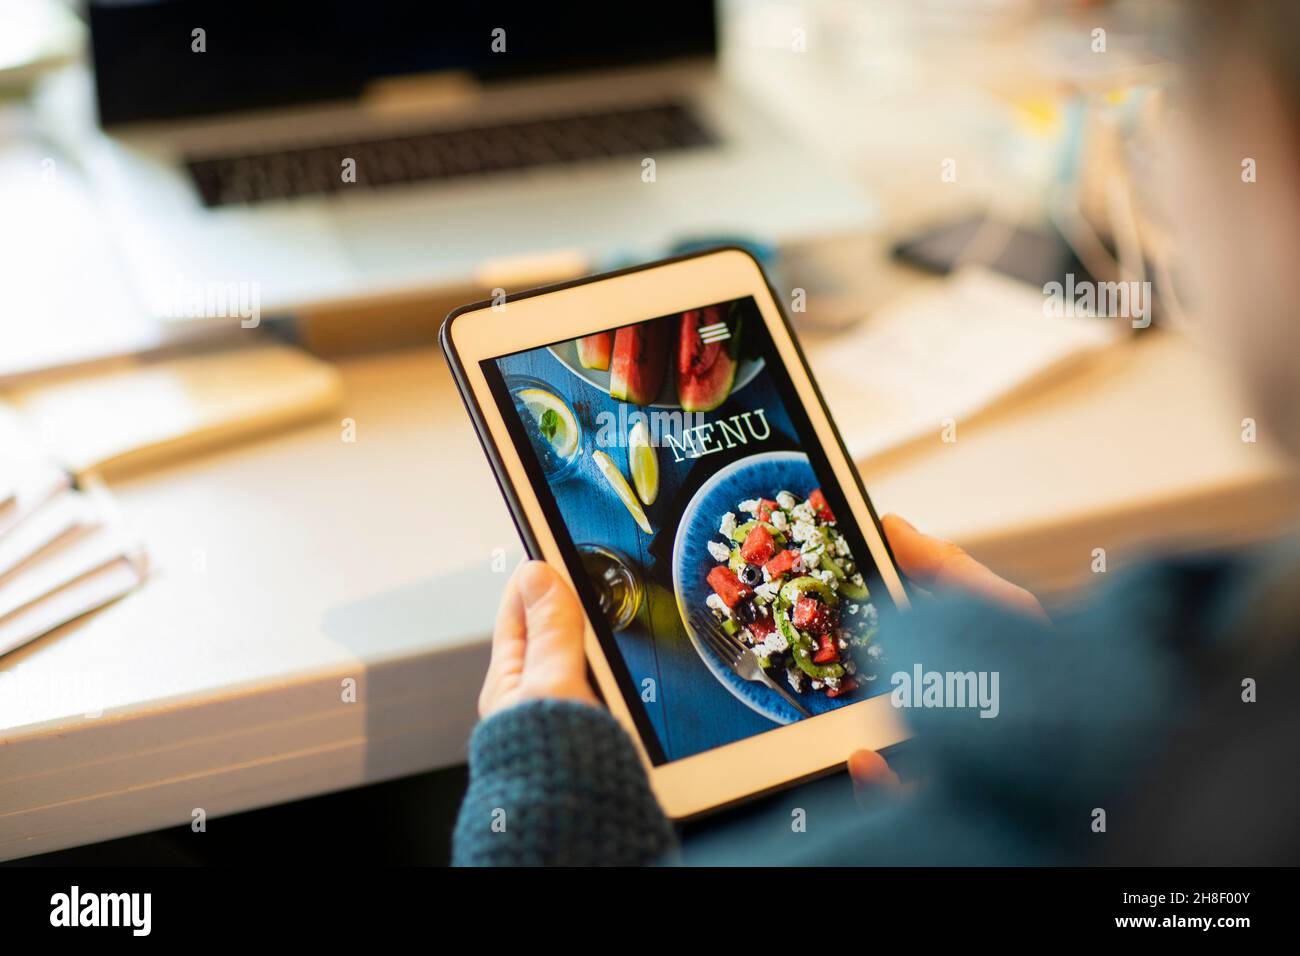 Woman looking at takeout menu on digital tablet Stock Photo